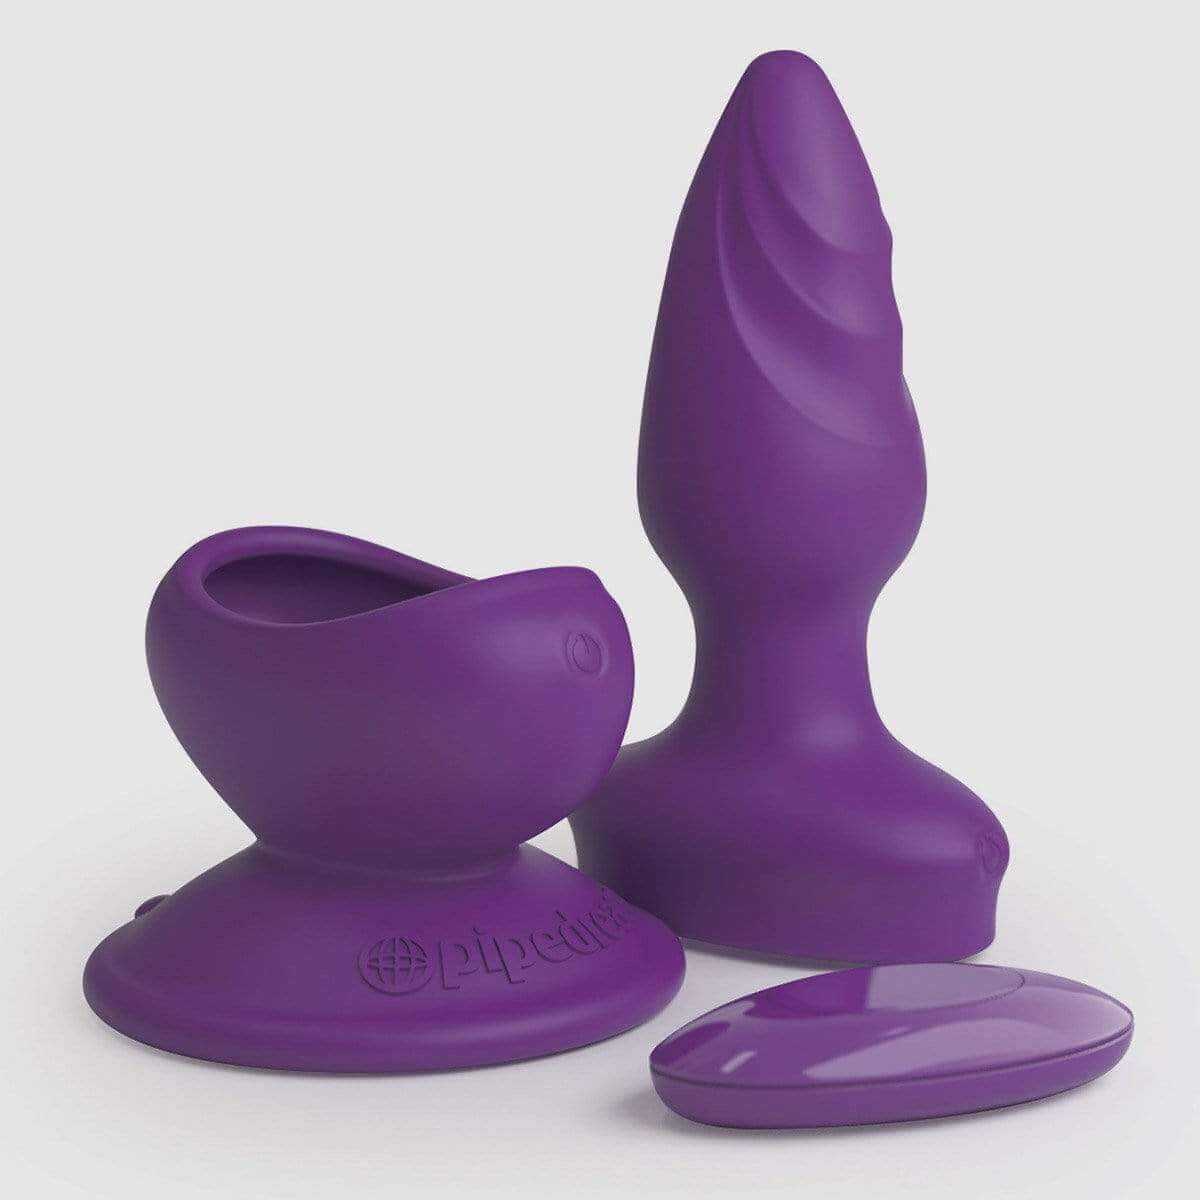 Wall Banger Plug - Purple - Thorn & Feather Sex Toy Canada